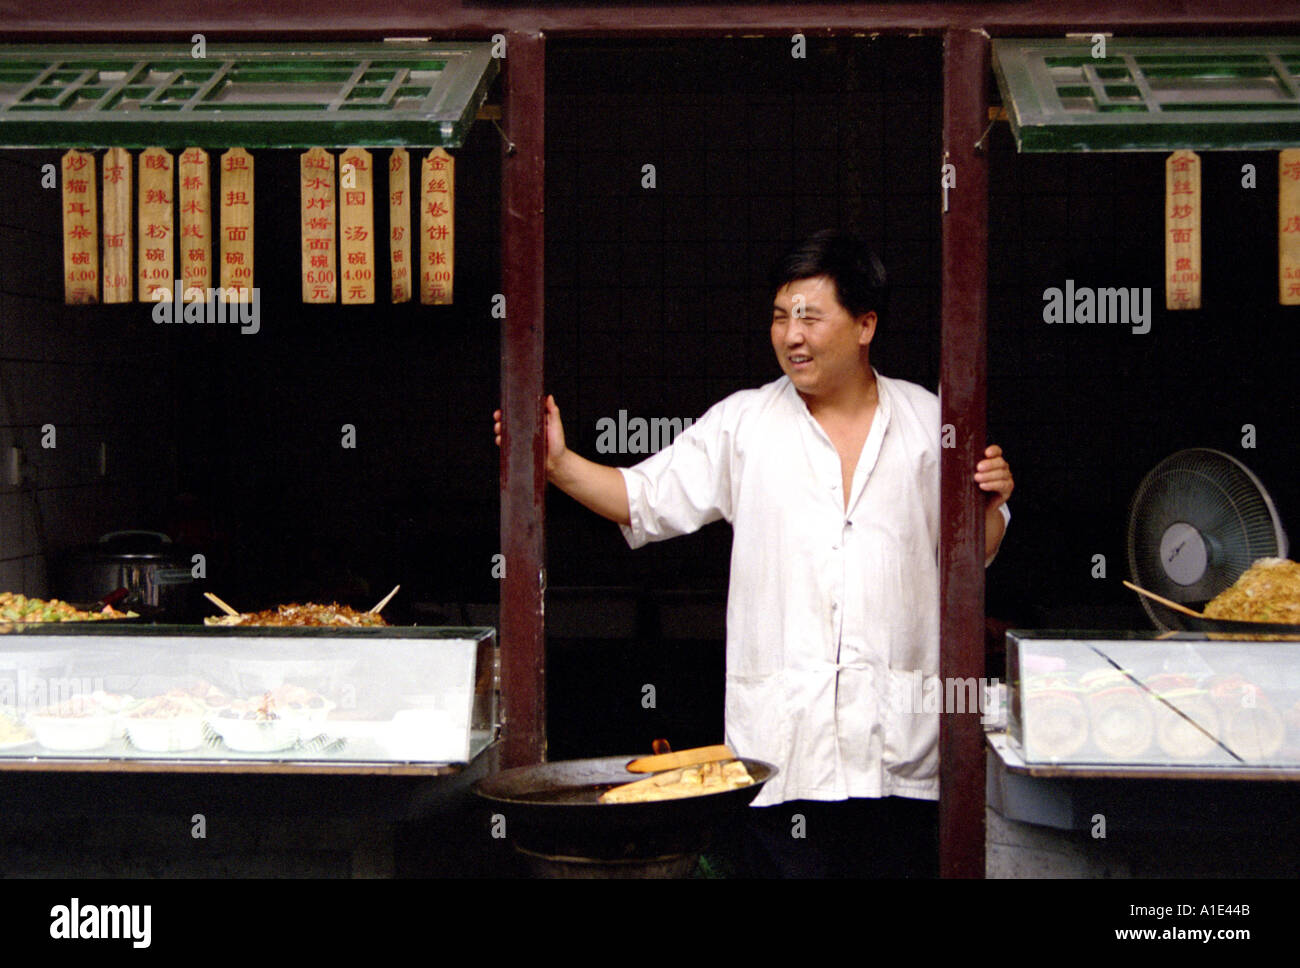 Food stall chef stands by his shop along Wangfujing district in Beijing, China Stock Photo